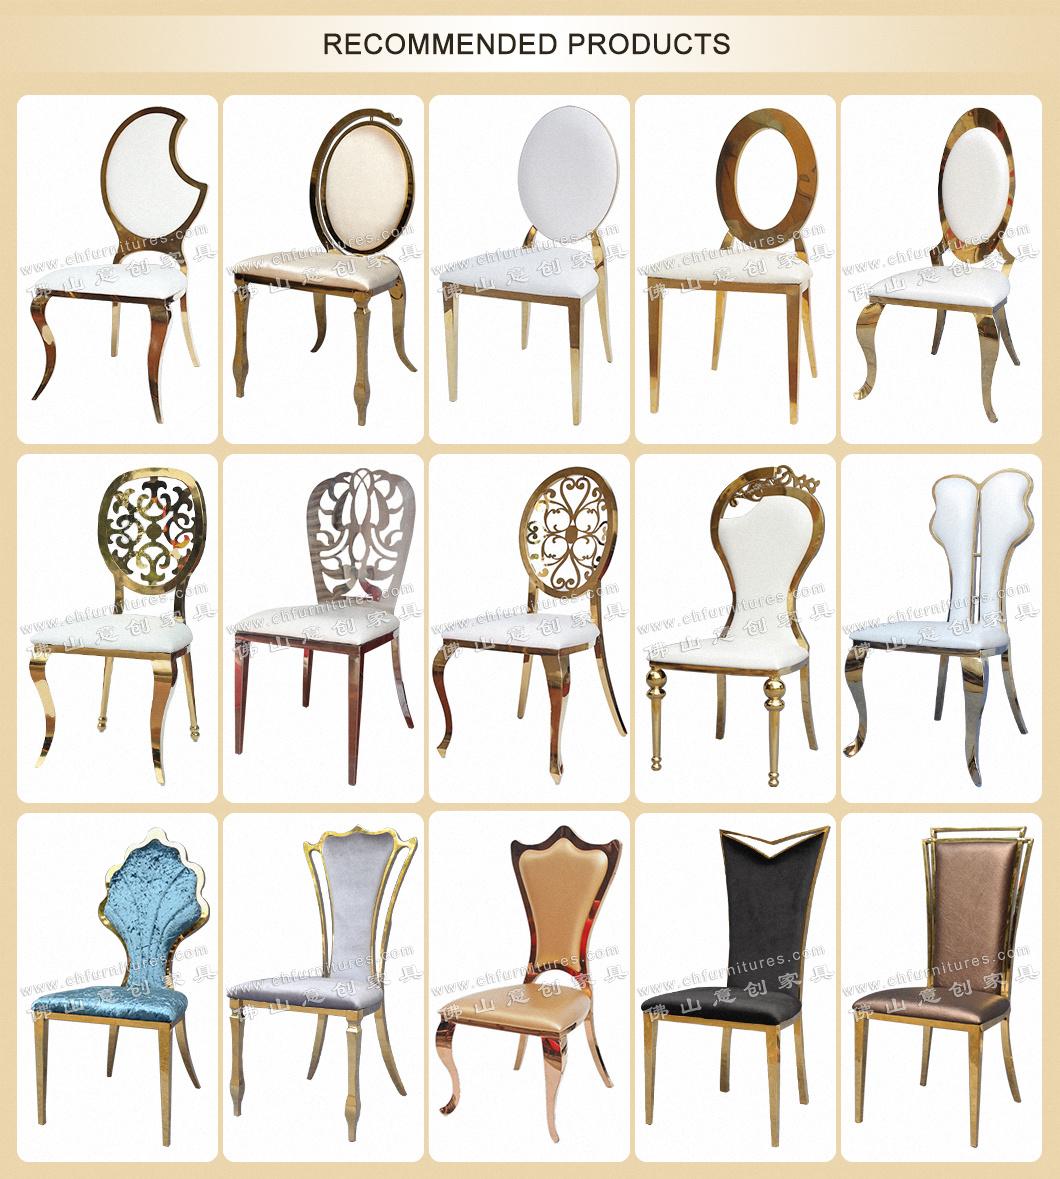 YCX-SS51 New Design Stainless Steel Napoleon Gold Chairs